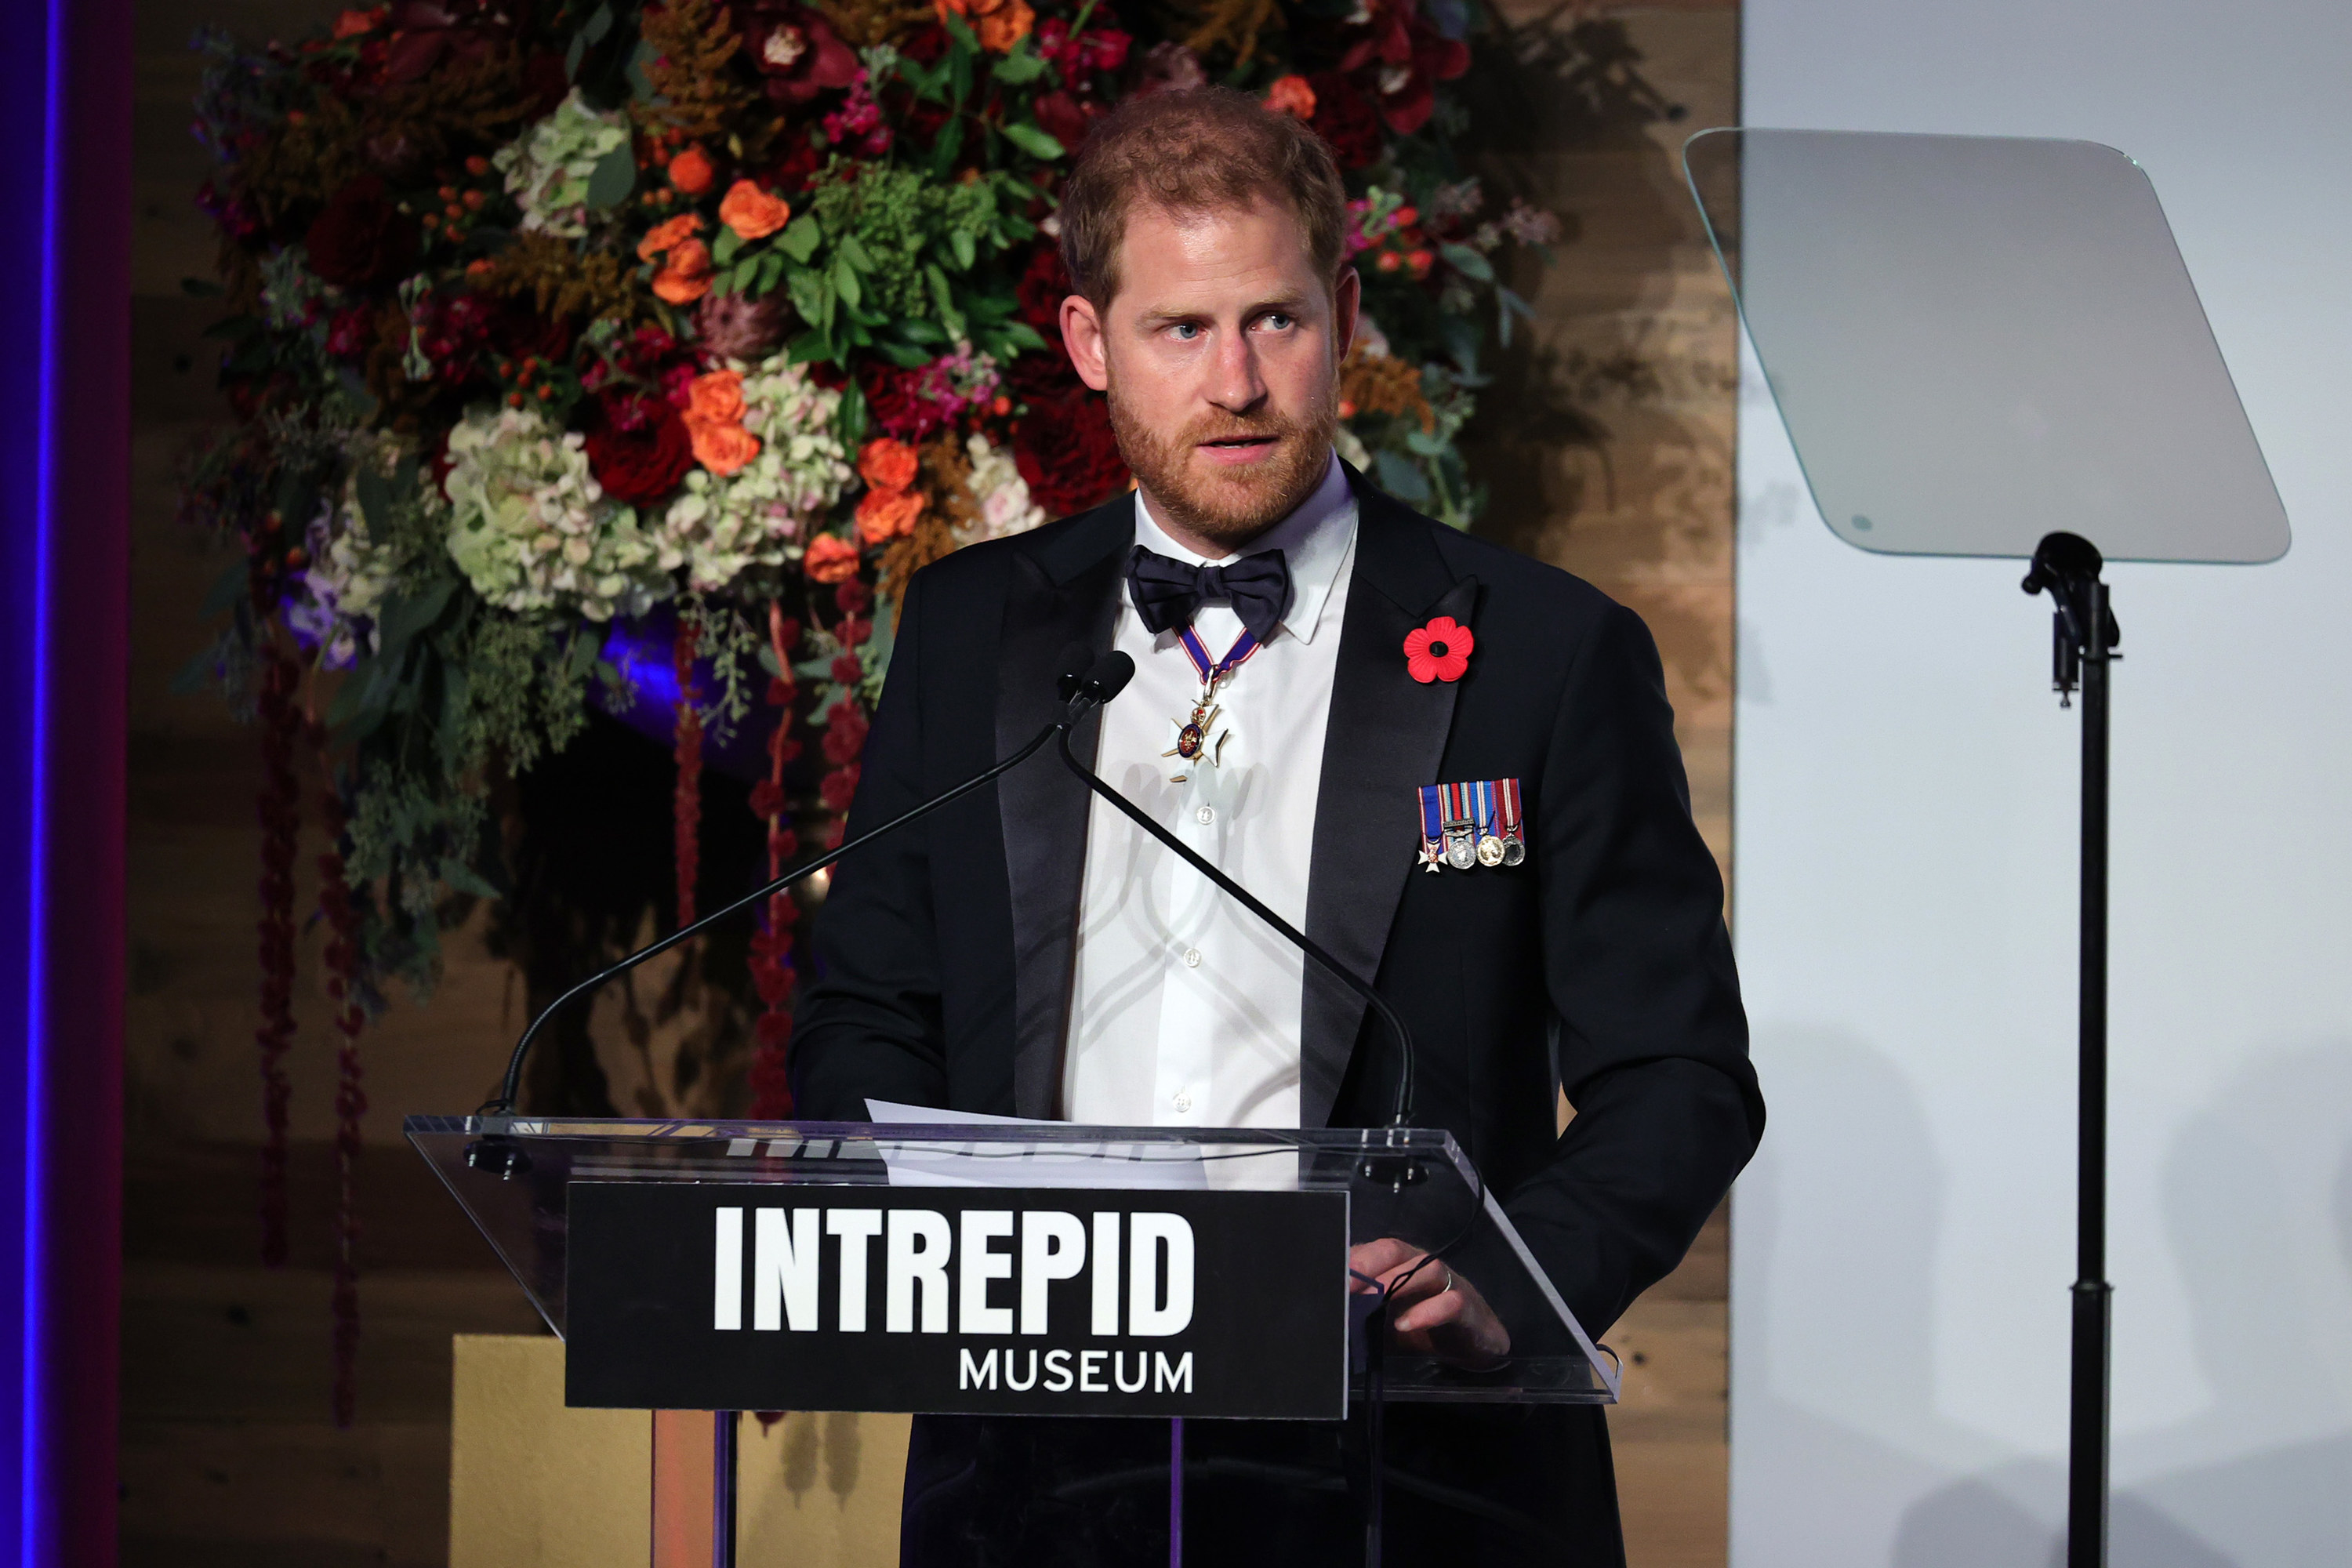 Prince Harry is speaking onstage at the Intrepid Museum